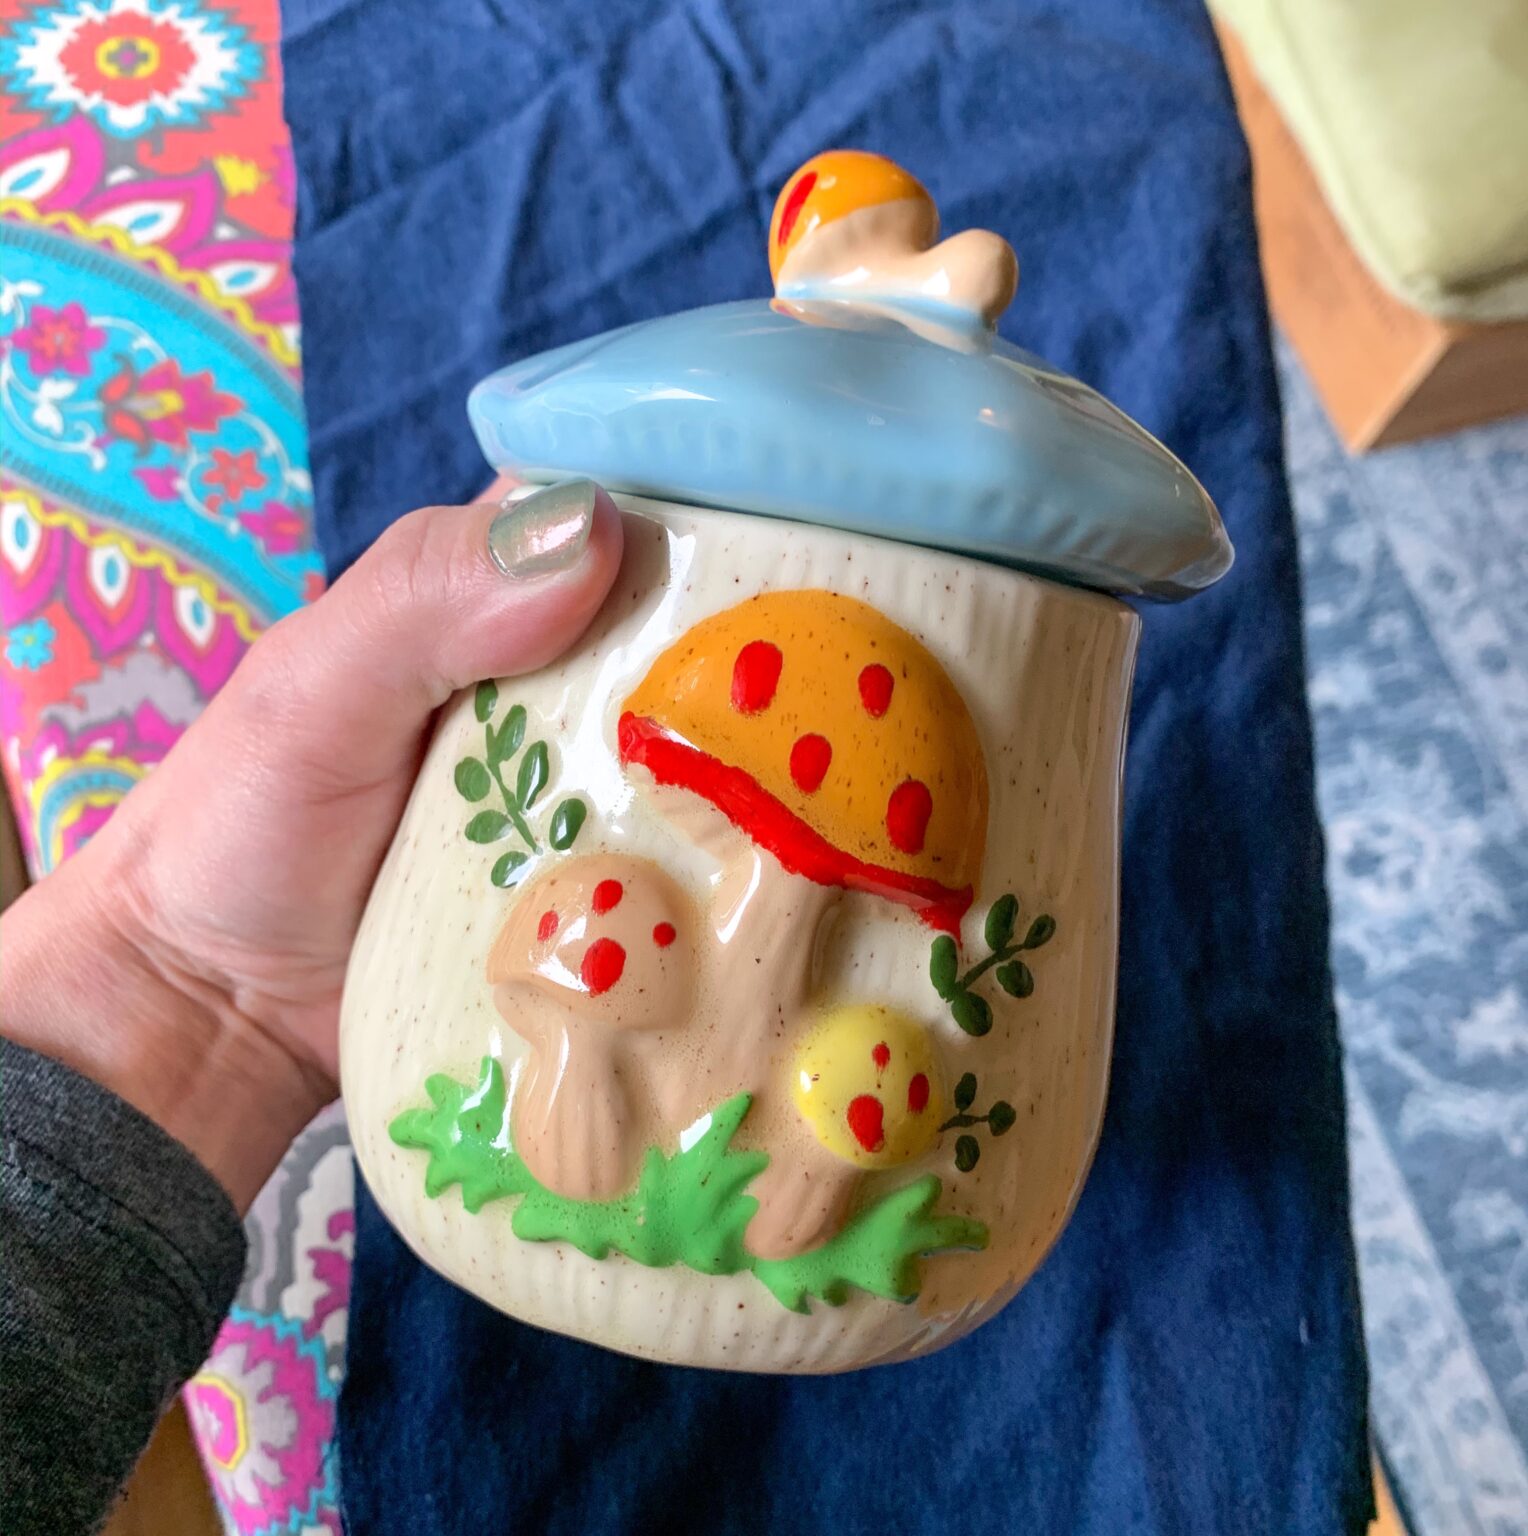 Upcycling a vintage canister or vintage sugar bowl as a needle cushion